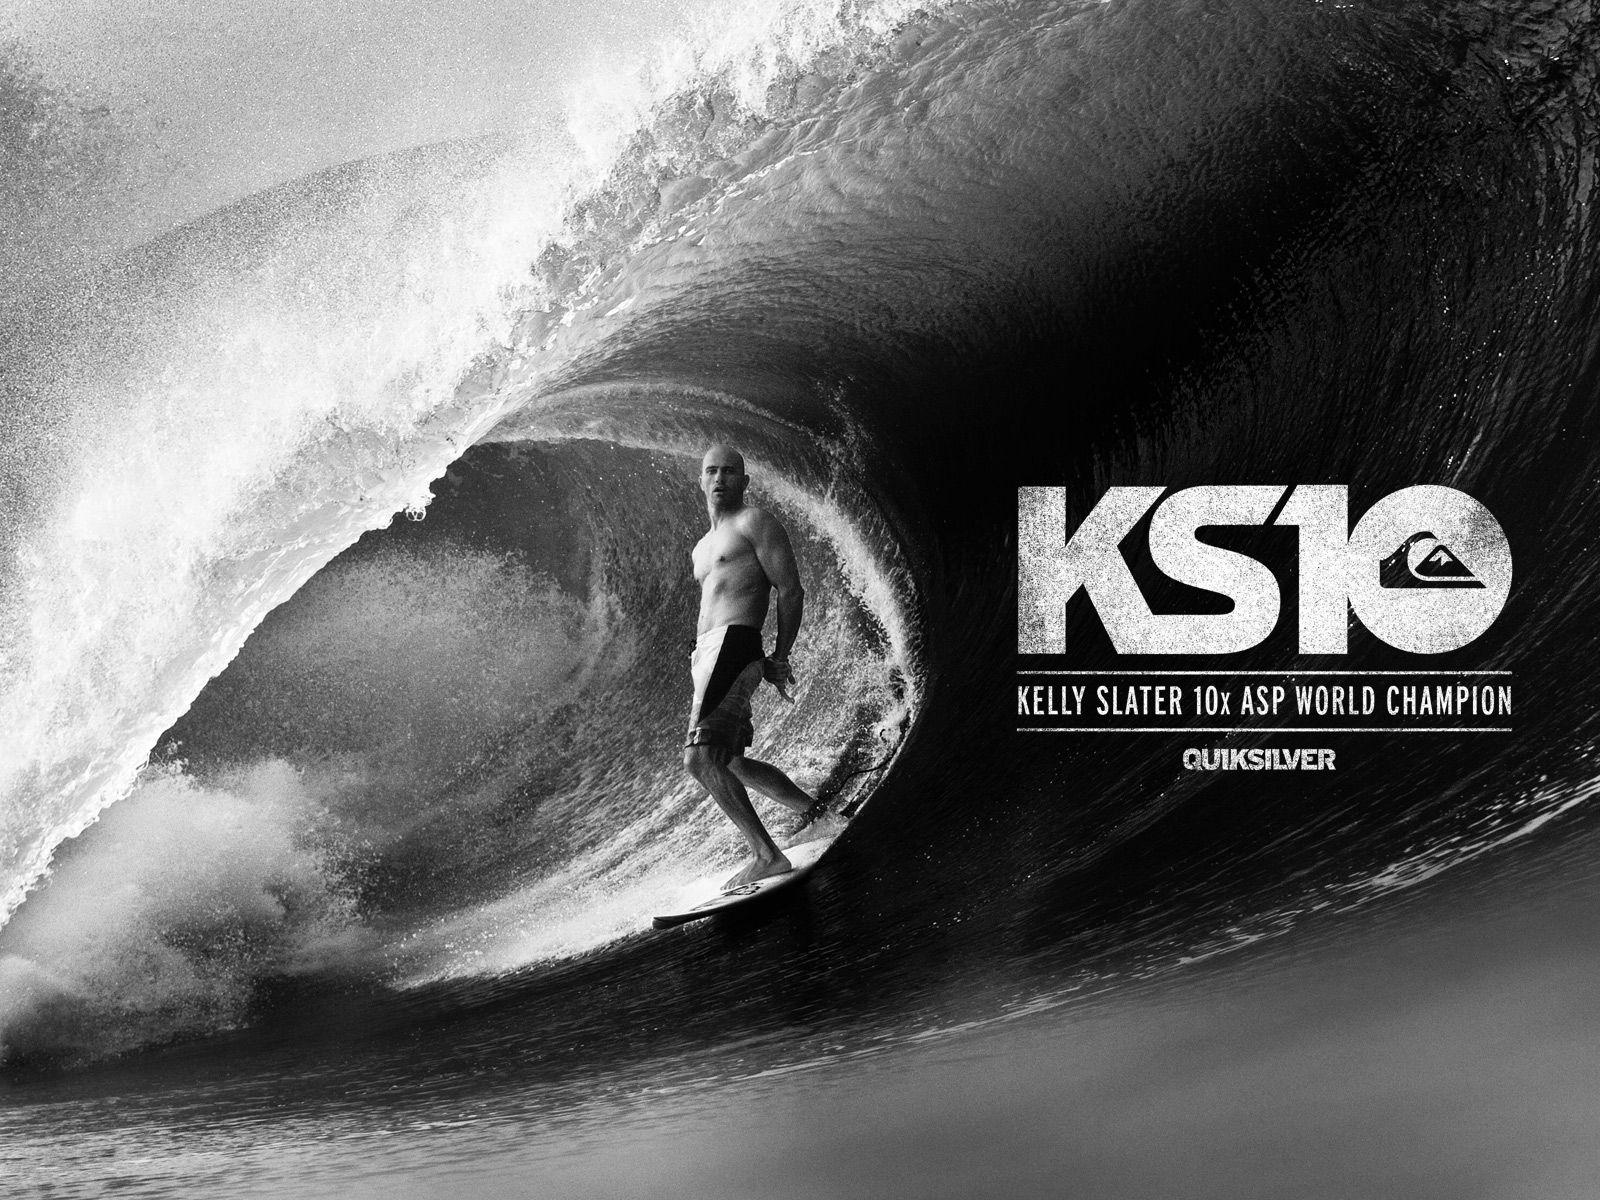 image about Quiksilver. Kelly slater